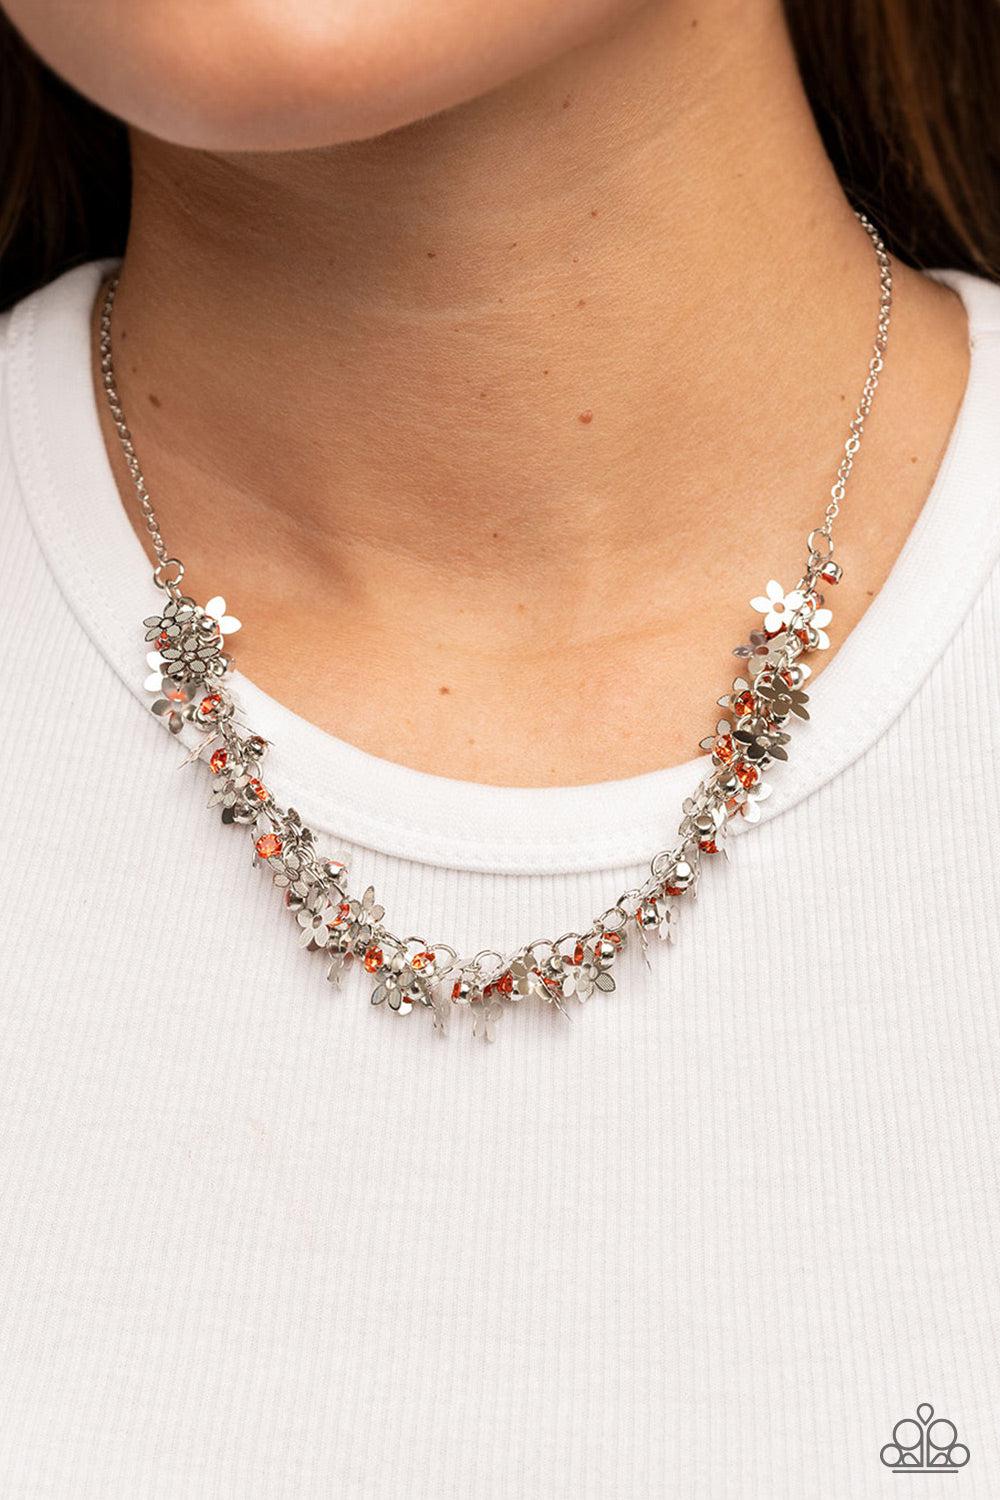 Fearlessly Floral Orange & Silver Flower Necklace - Paparazzi Accessories- lightbox - CarasShop.com - $5 Jewelry by Cara Jewels